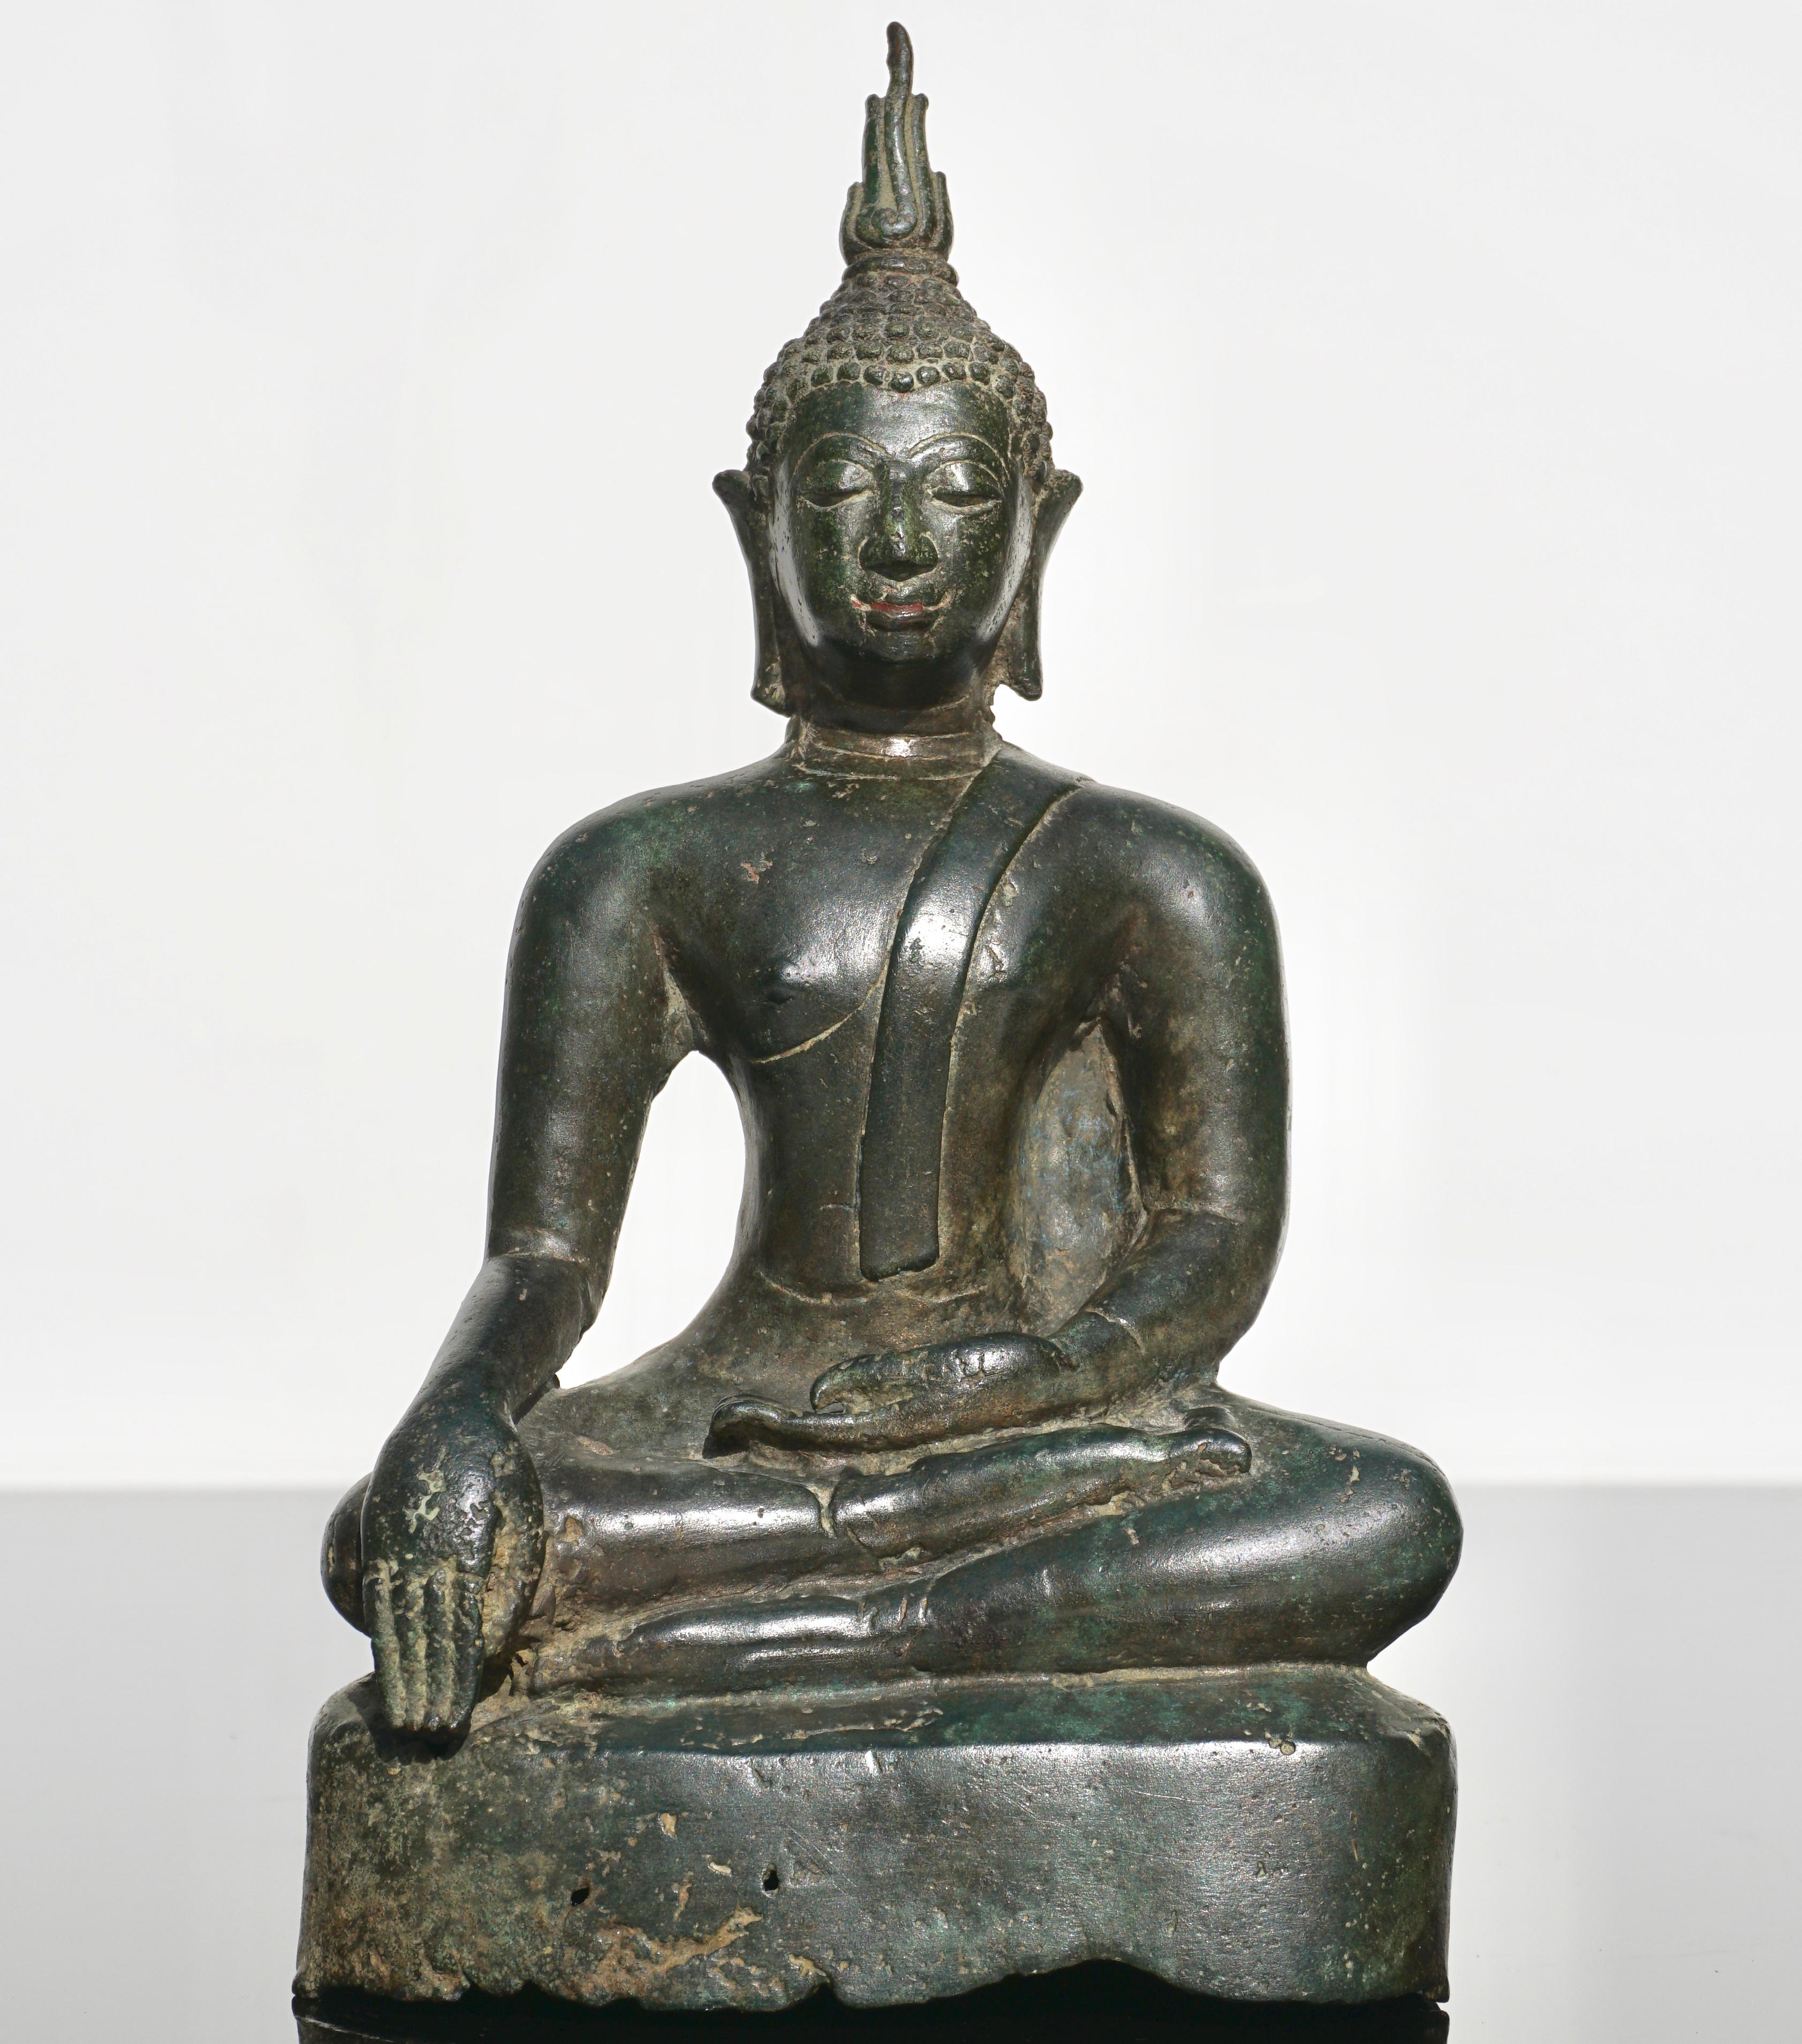 A bronze seated figure of Buddha Statue
Thailand, Ayutthaya period, 15th-16th century (early Ming dynasty period)

The face with elongated eyes beneath arched brows, flanked by pendulous earlobes, the hair in tight curls and the ushnisha topped by a